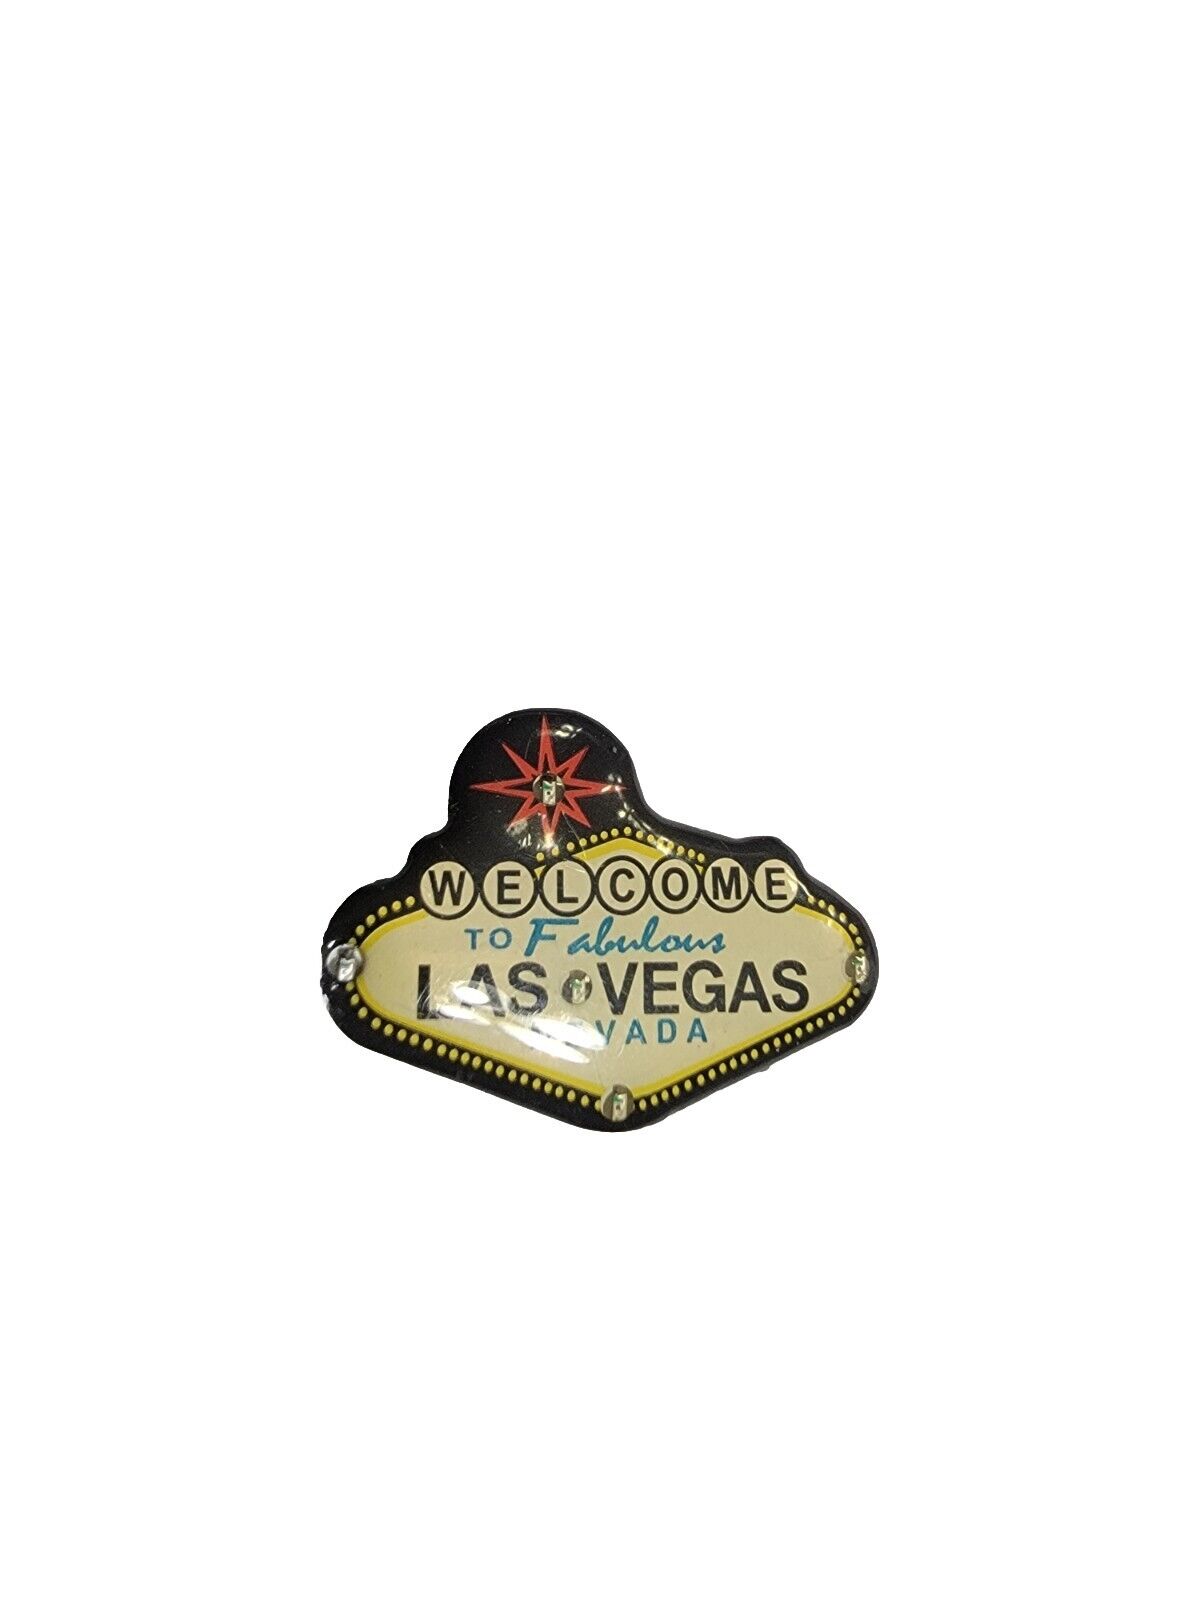 Welcome to Fabulous Las Vegas Nevada Pin Blinking Lights Magnetic Back